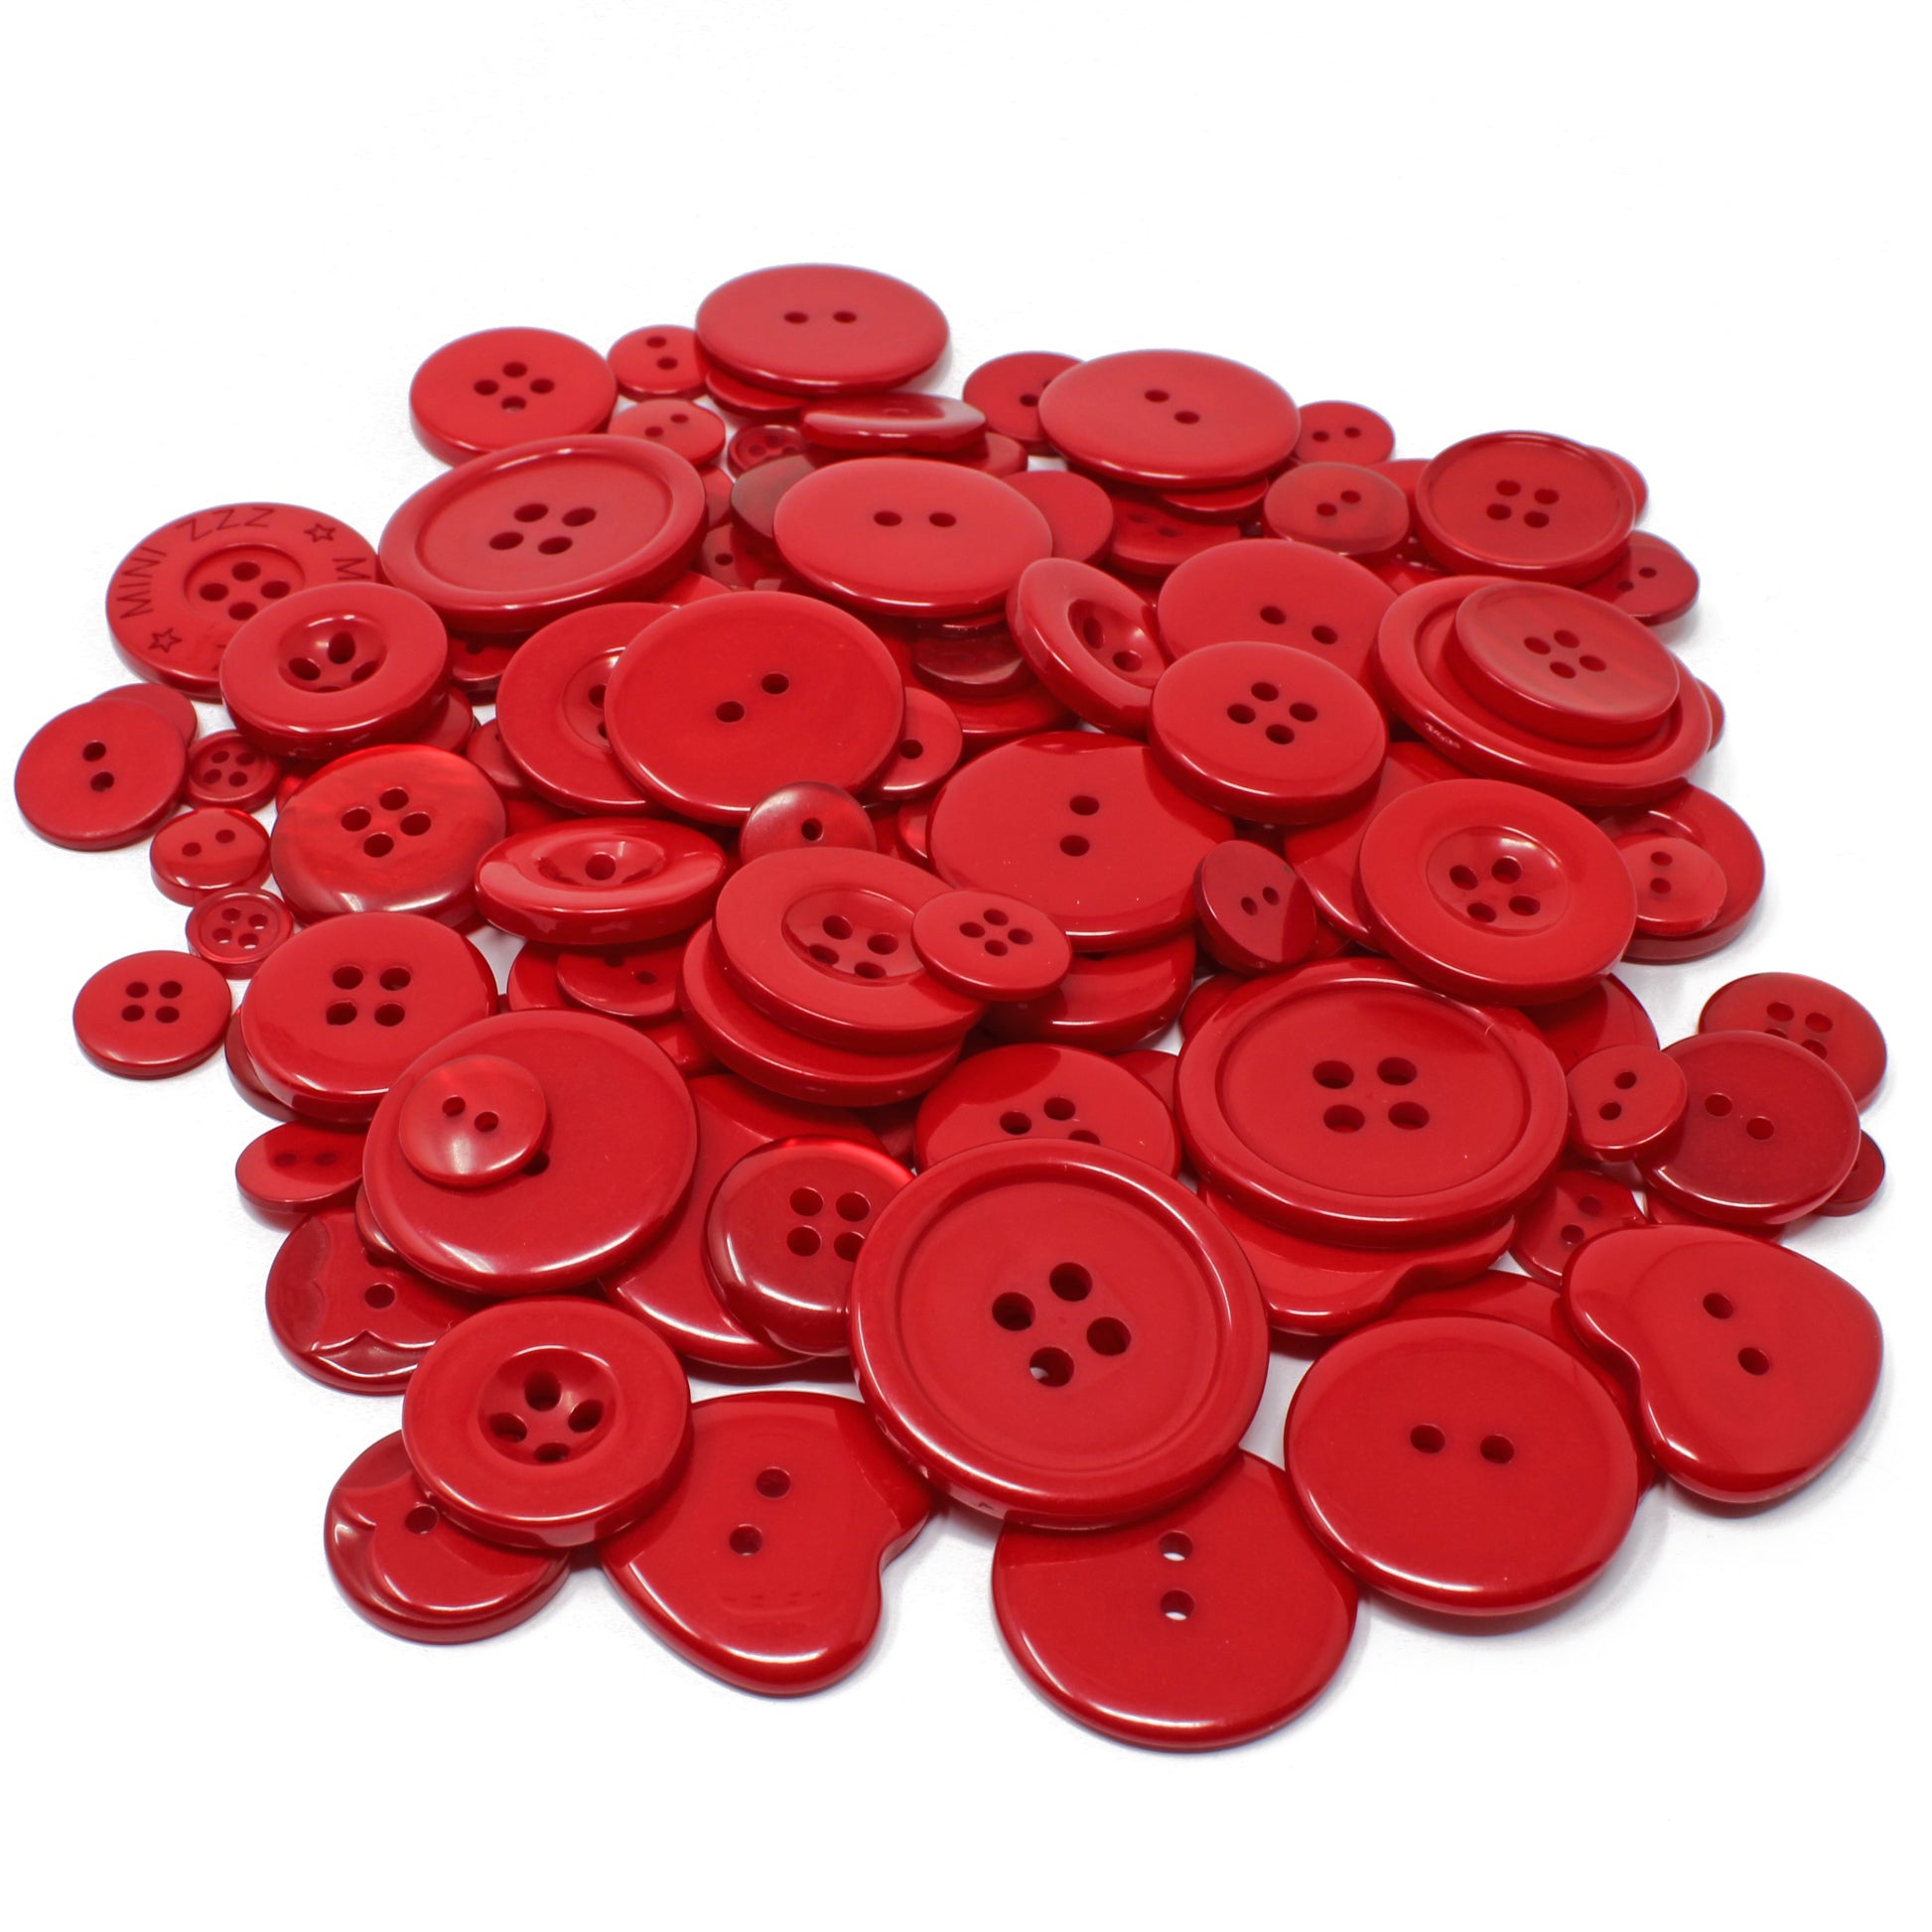 Red 100g Bags Of Mix Acrylic & Resin Buttons